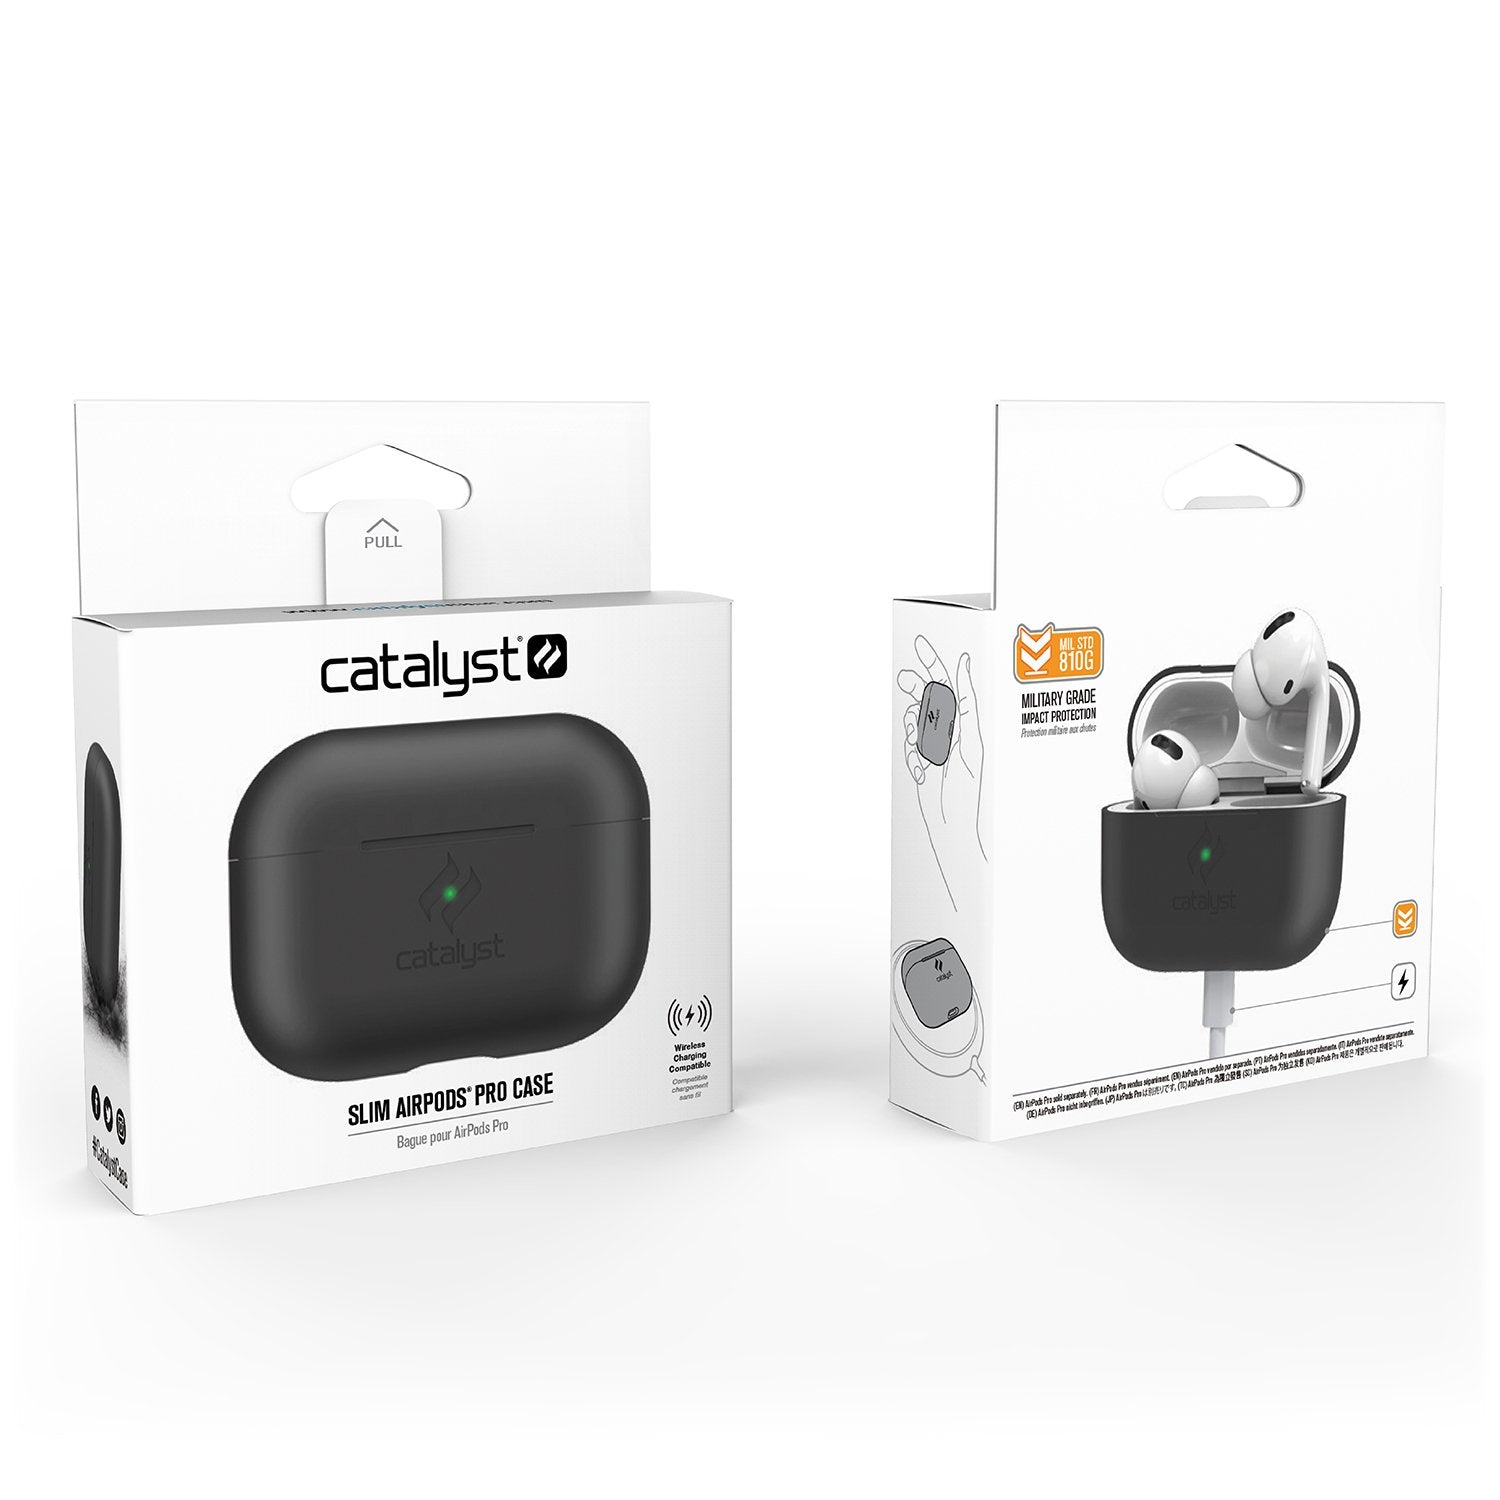 Catalyst airpods pro gen 2/1 slim case showing the front and back view of the packaging in a stealth black colorway